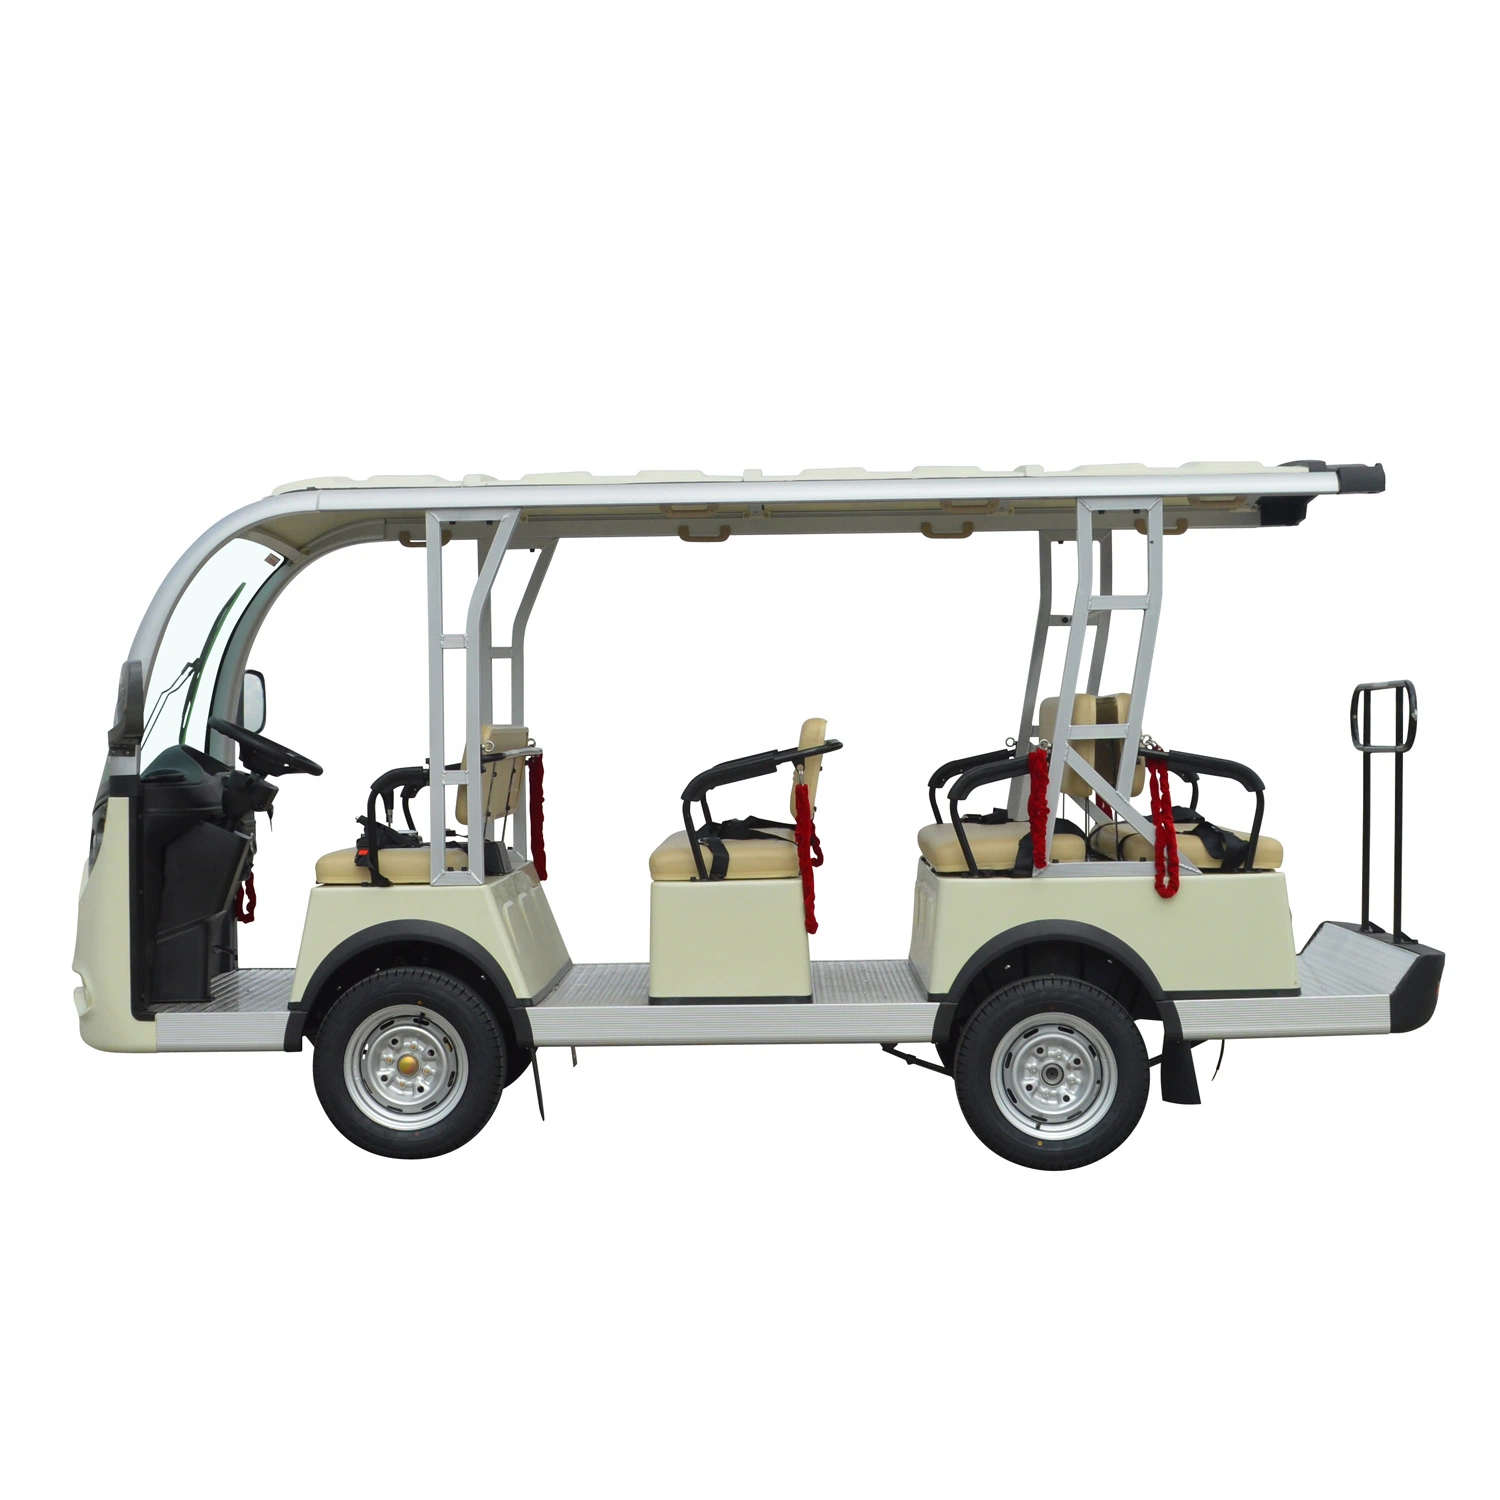 Anti-Fatigue Luxury Safety, Low Speed, Easy Handle 11 Passengers Tourist Shuttle Vehicle (Lt-S8+3)